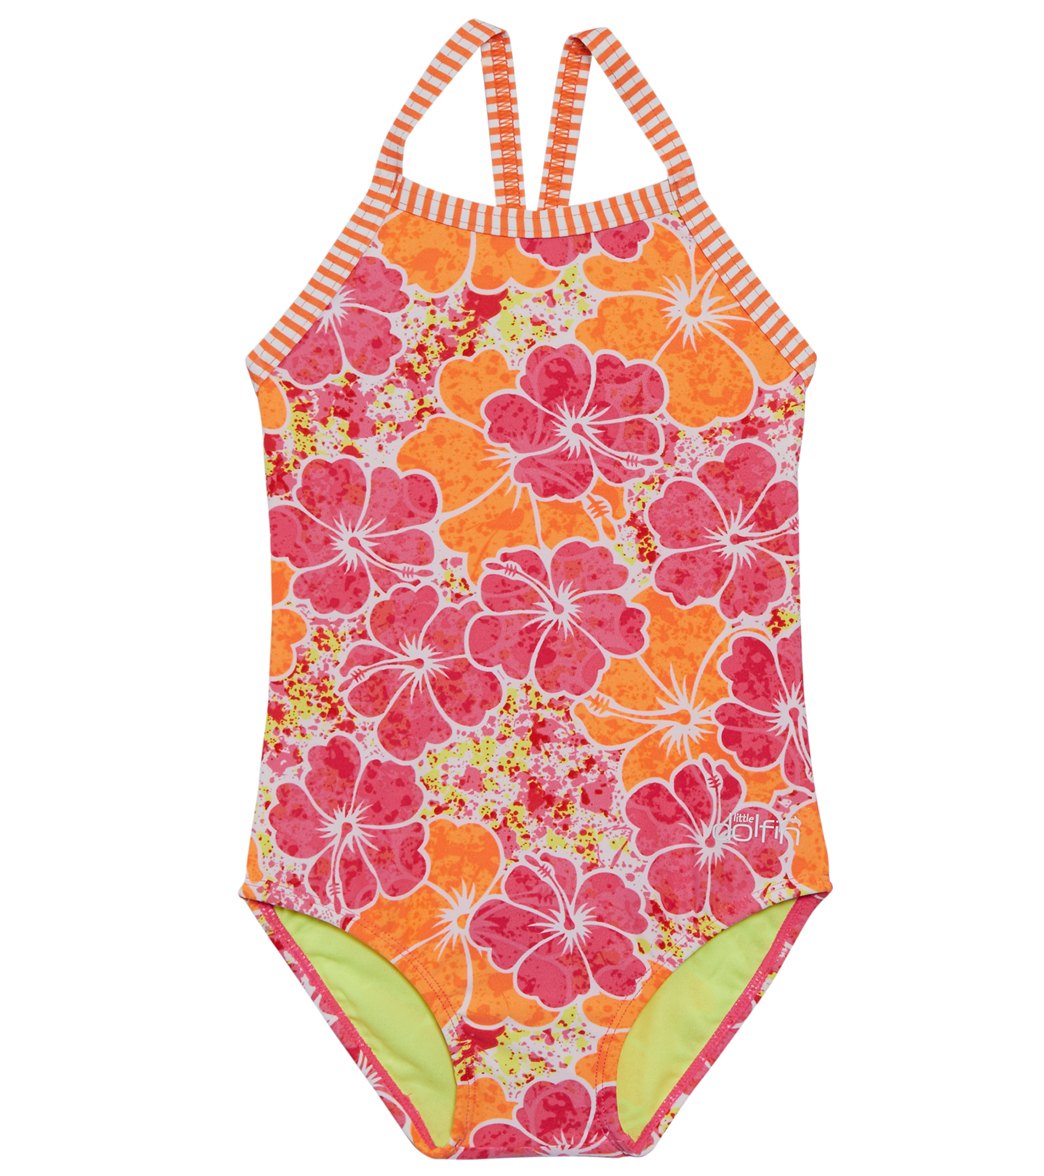 Dolfin Little Dolfin Toddler Hula Girl One Piece Swimsuit at SwimOutlet.com